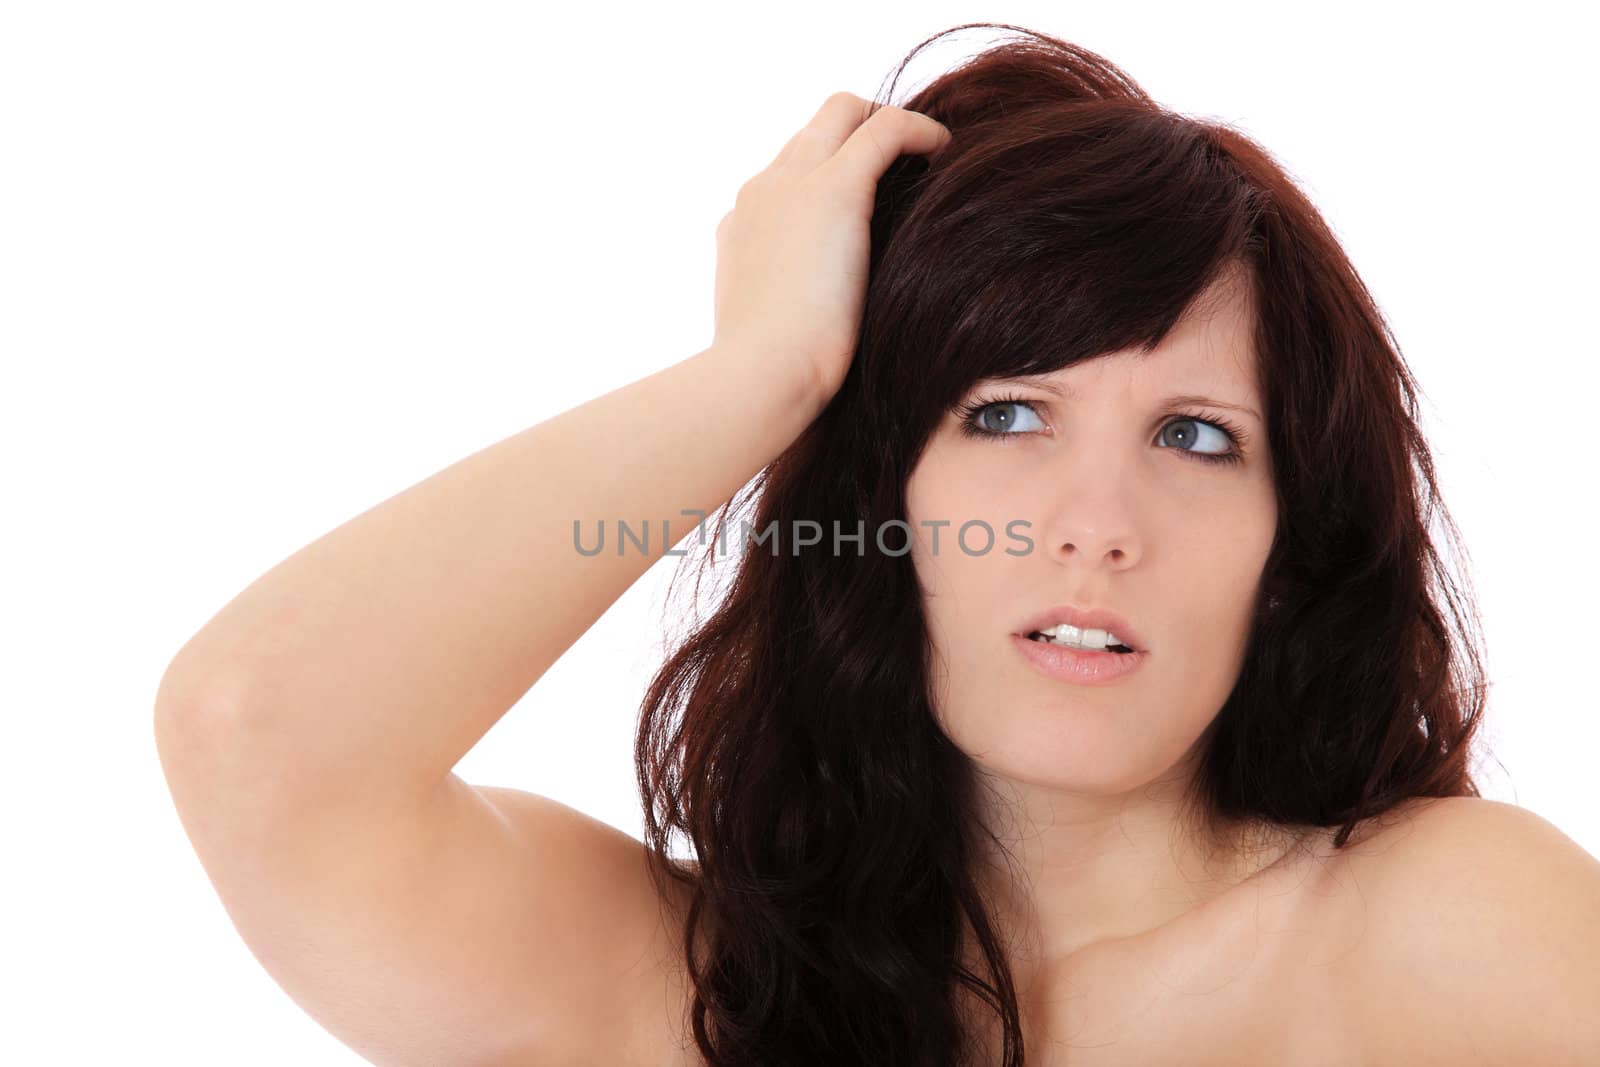 Frustrated young woman. All on white background.